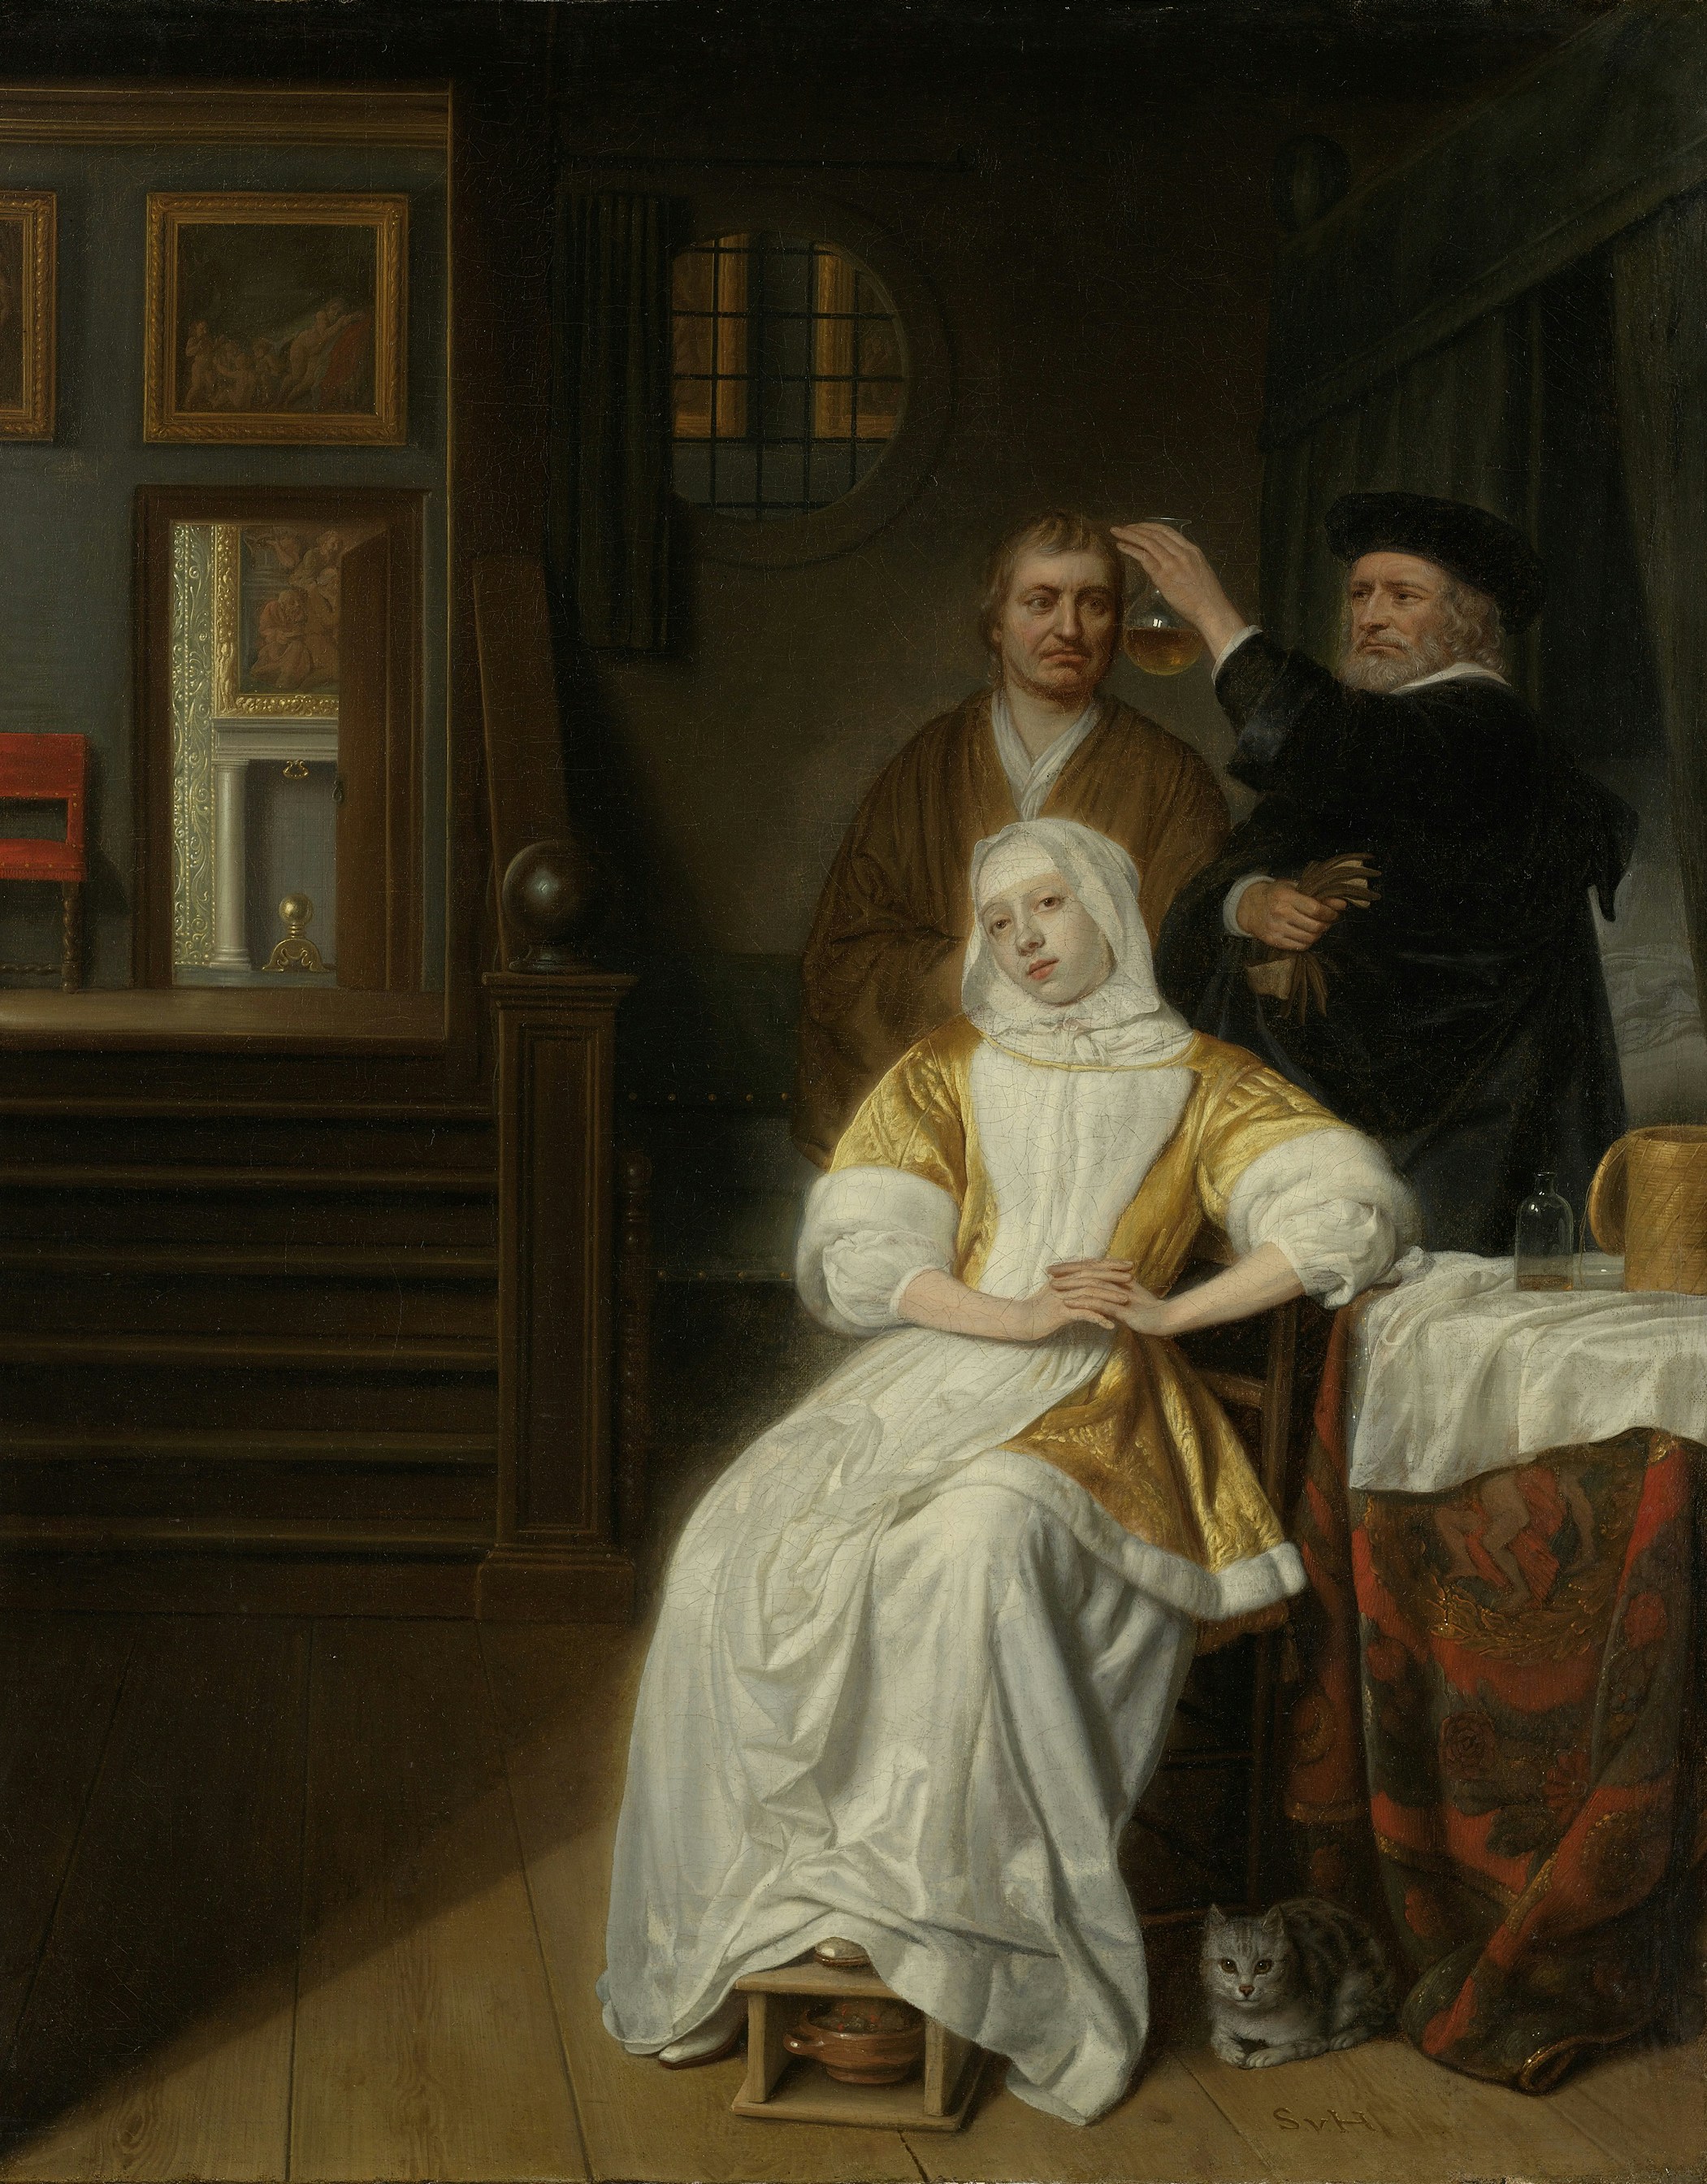 Title: 'The Anemic Lady' Date: 1660. Institution: Rijksmuseum. Provider: Rijksmuseum. Providing Country: Netherlands. Public Domain